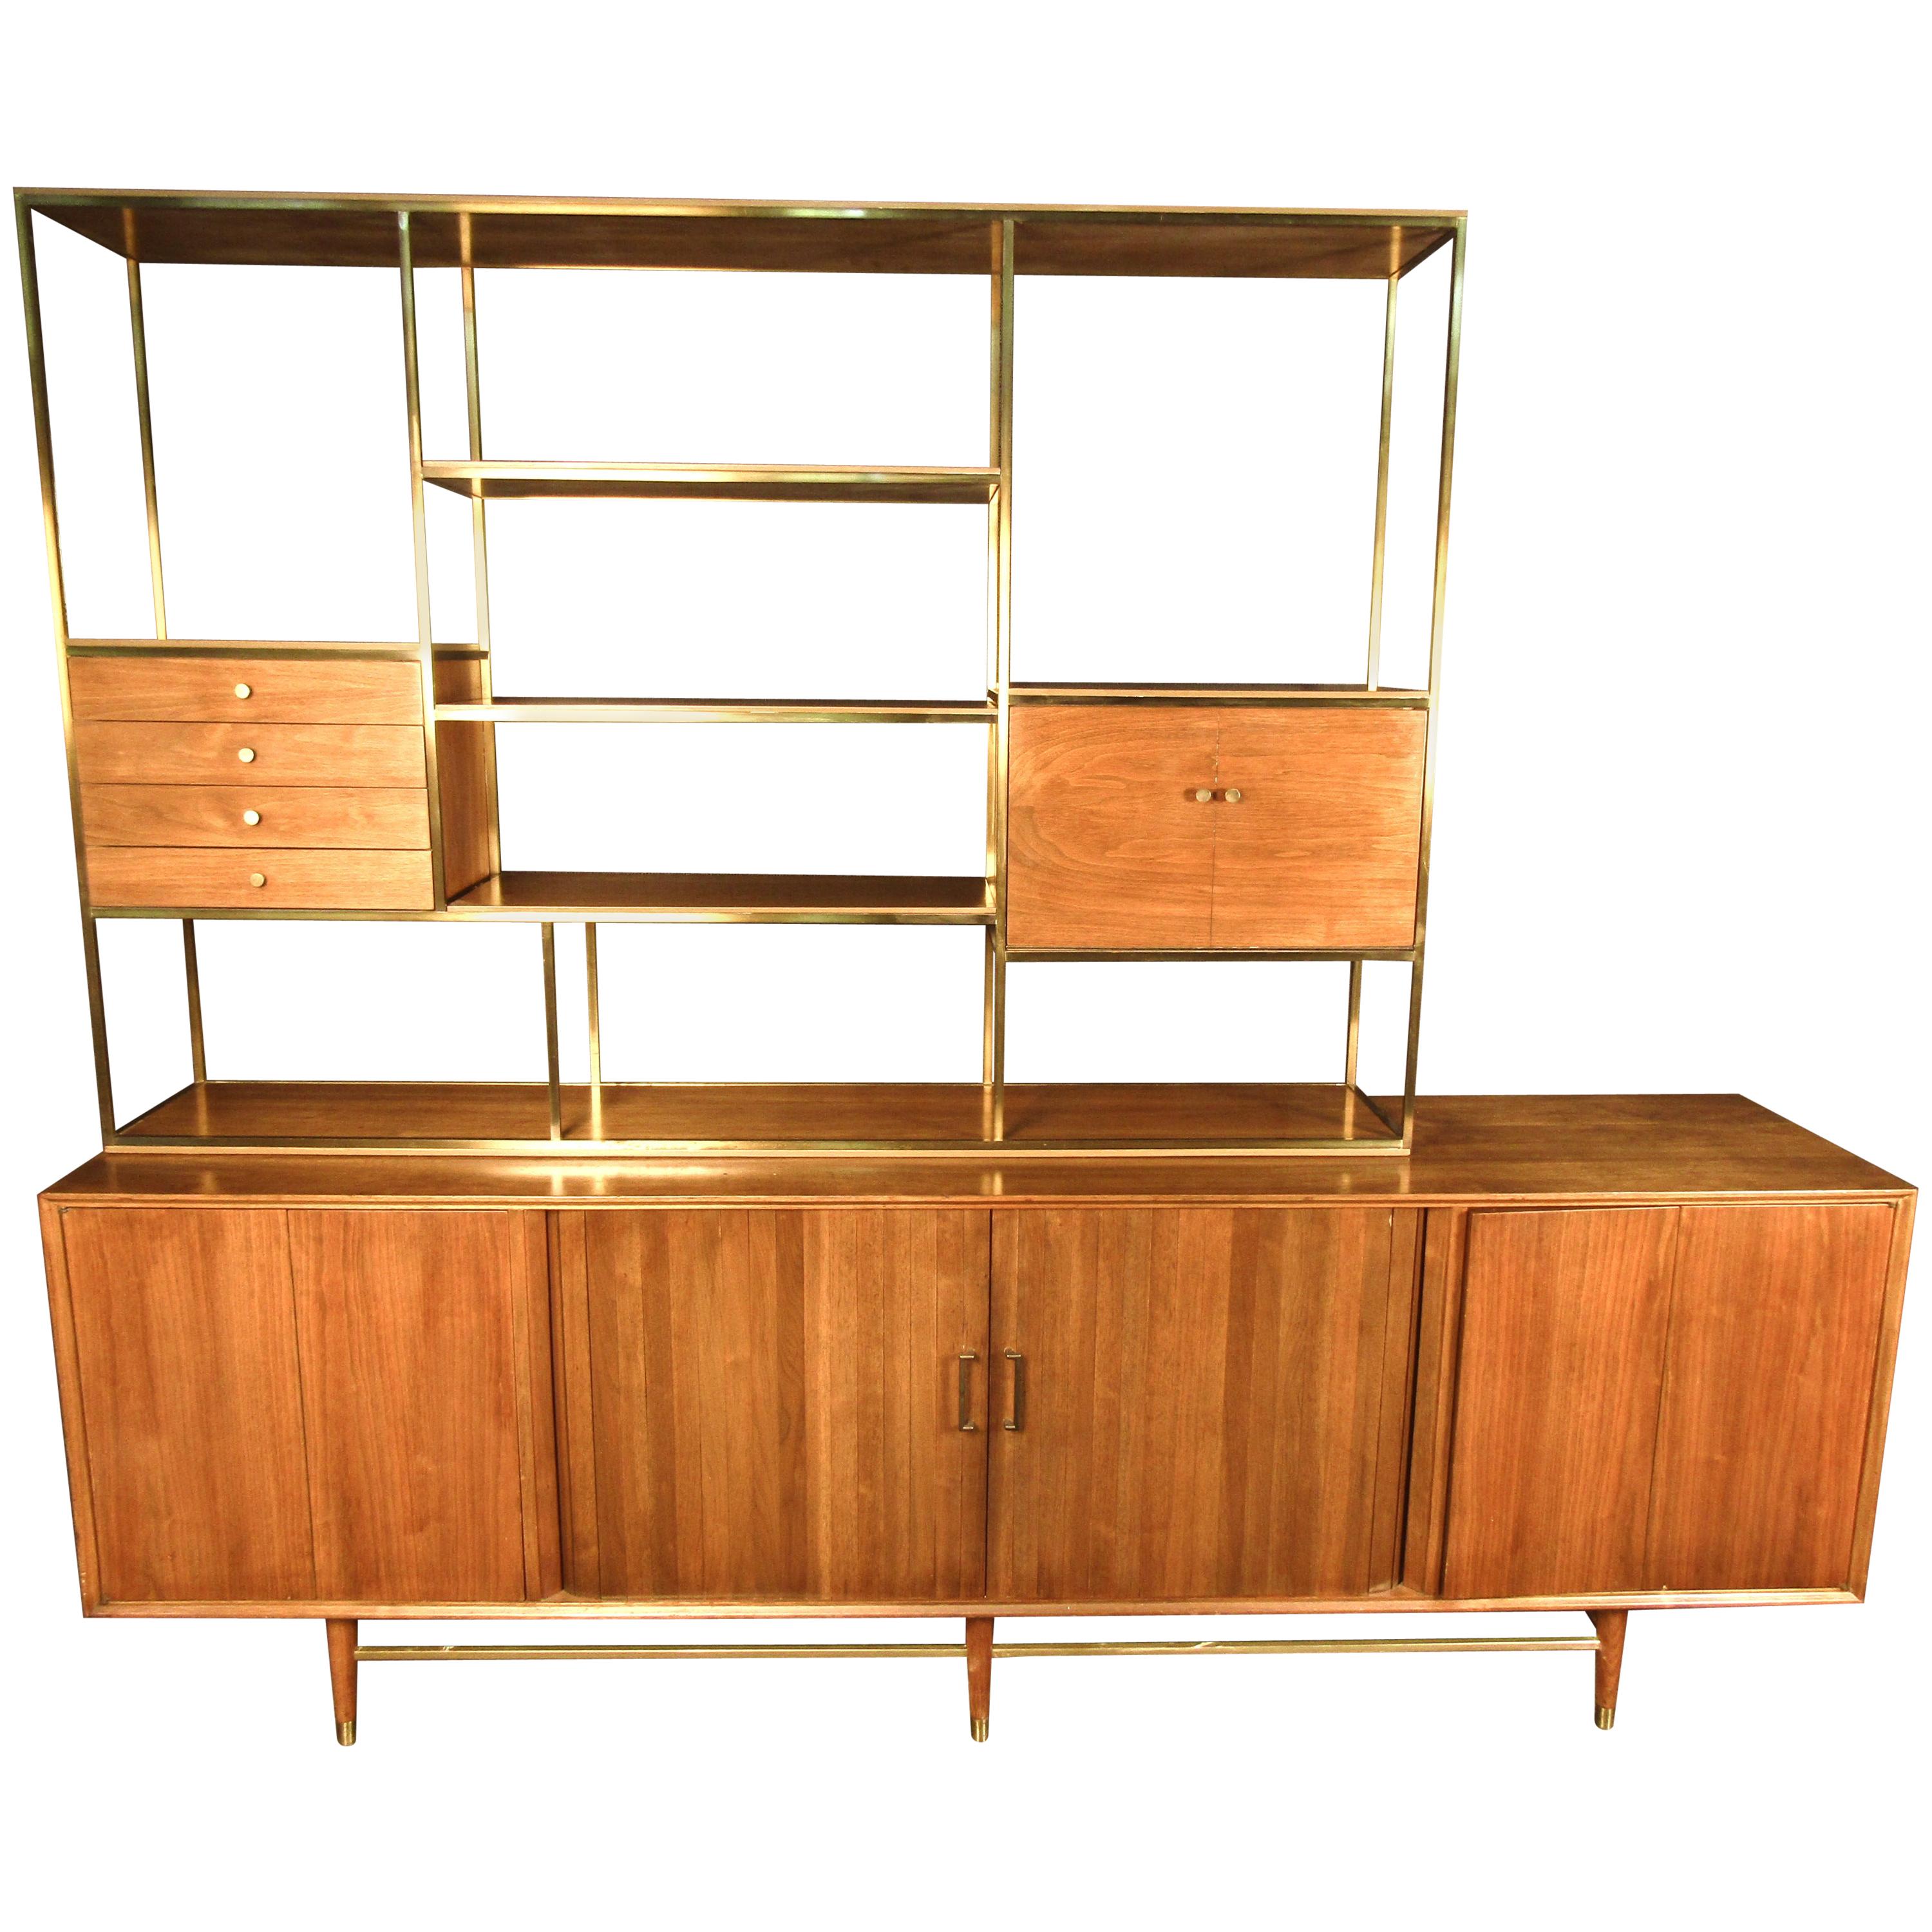 Stunning Midcentury Wall Unit by Furnete